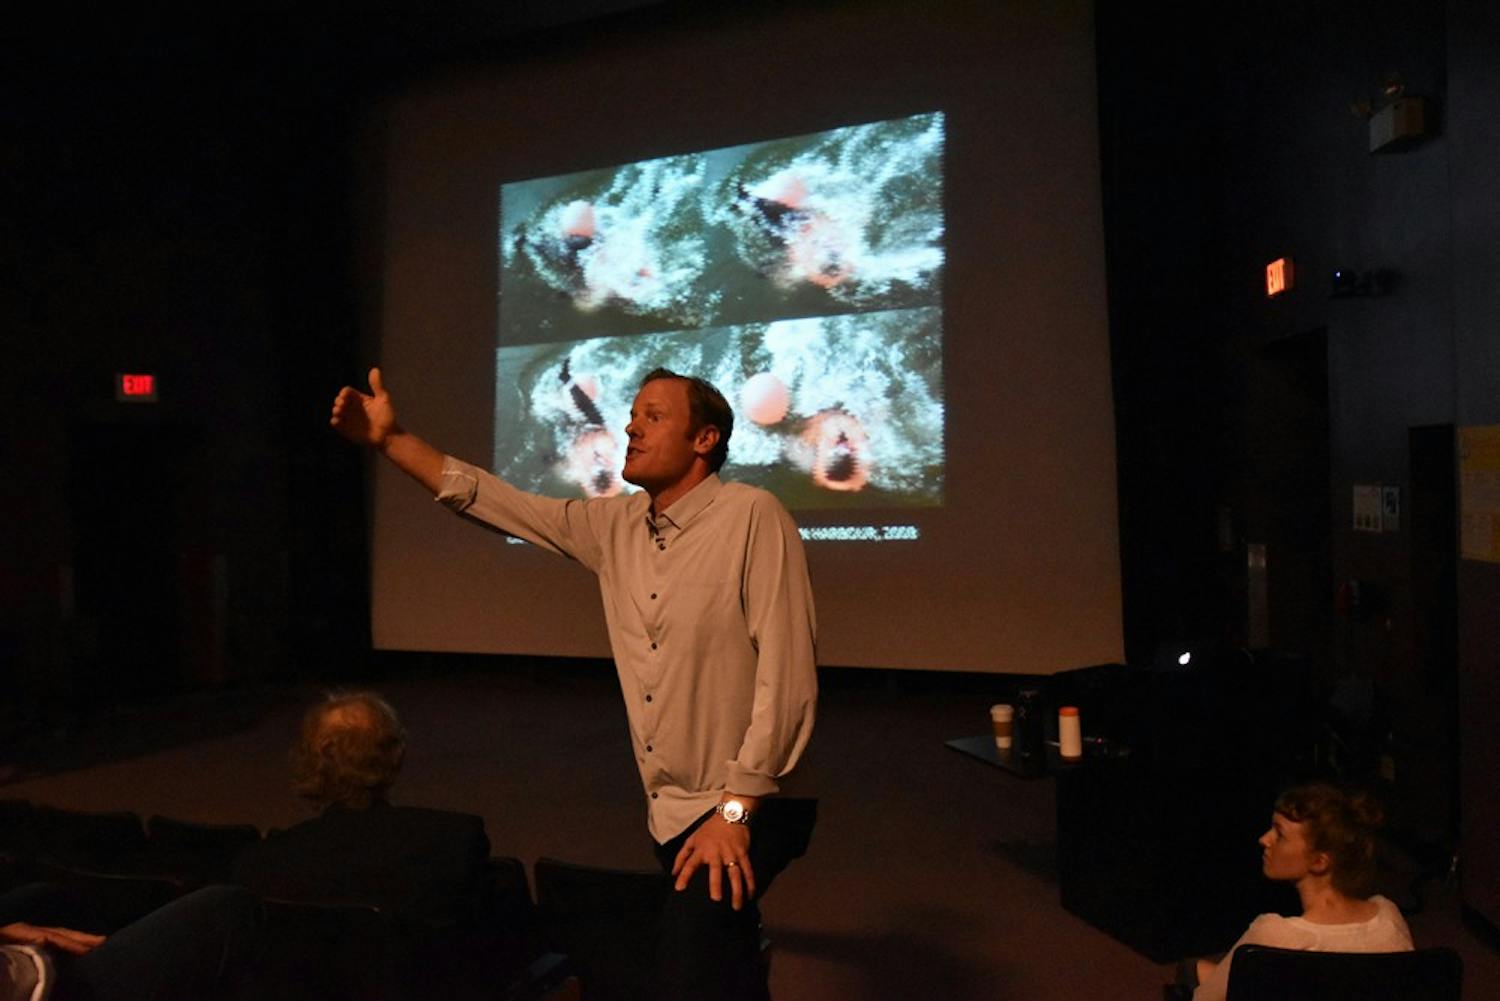 Craig Smith lectures students on Tuesday evening at Hanes Art Center.